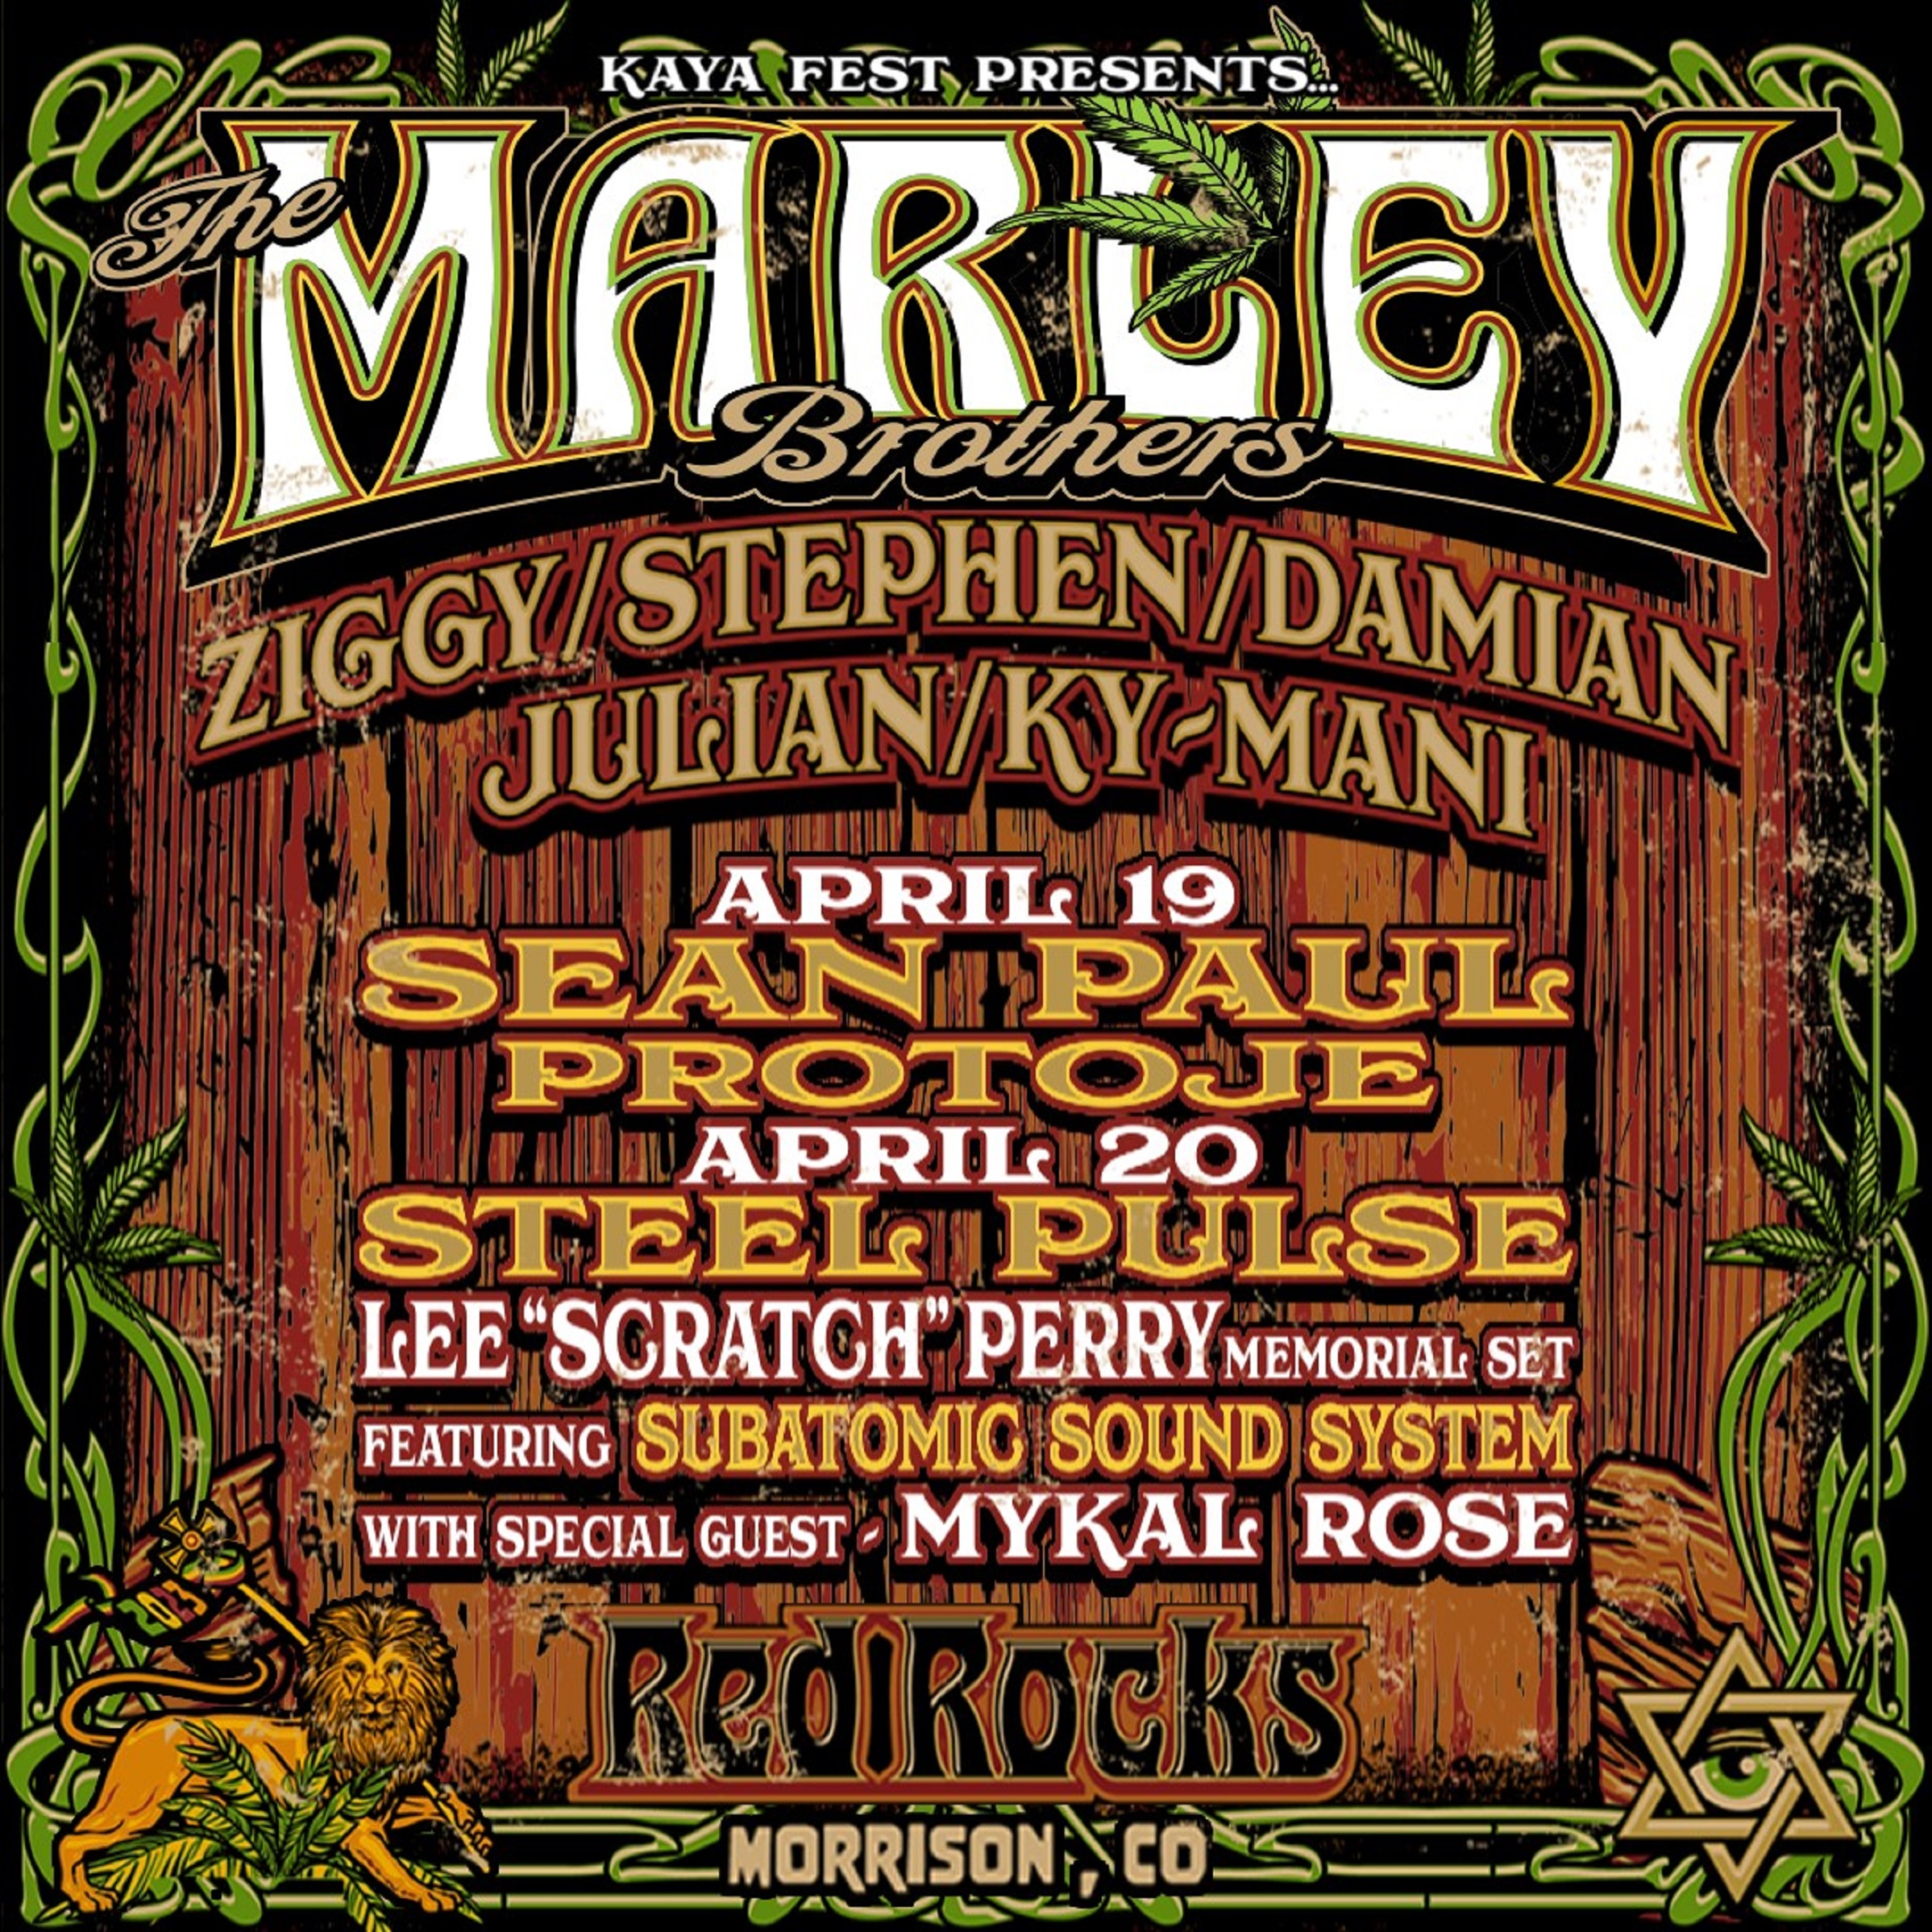 THE MARLEY BROTHERS - Red Rocks Amphitheatre - April 19 + 20, 2023